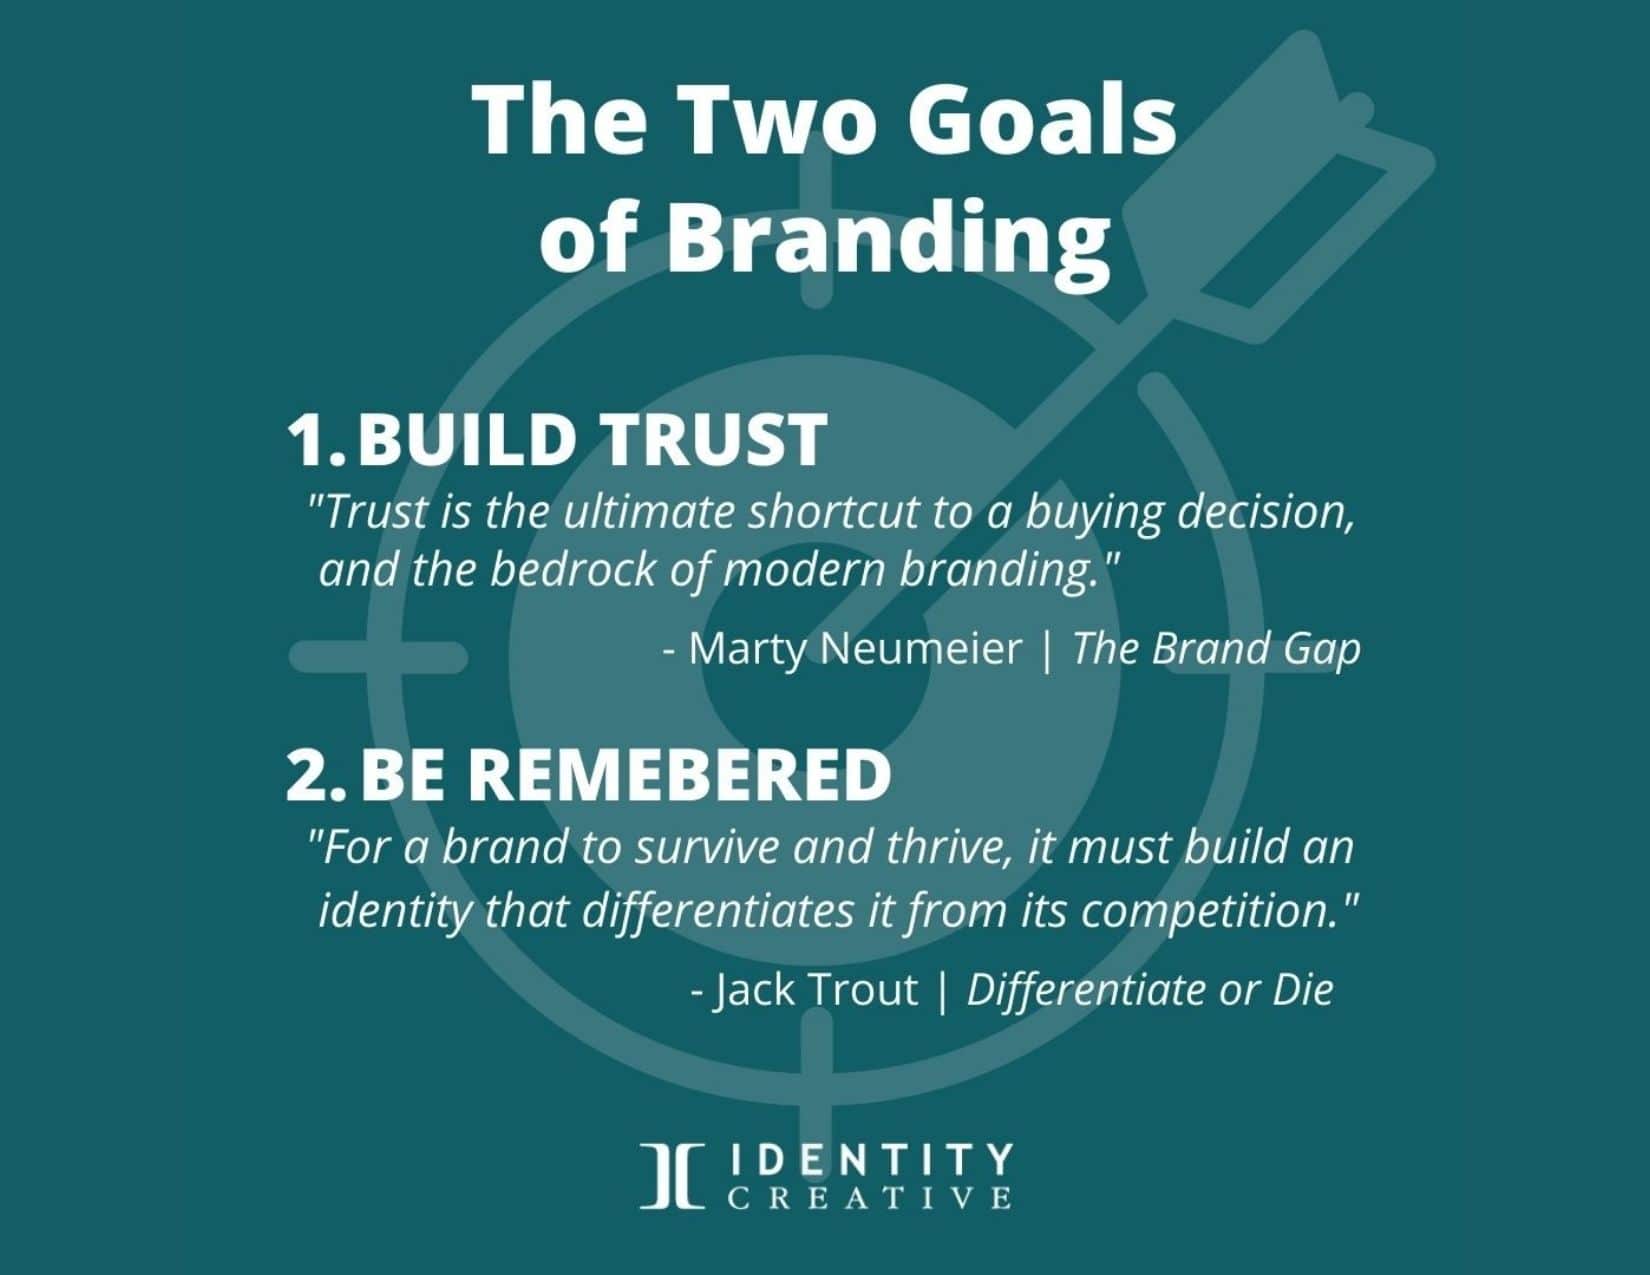 Know the Two Goals of Branding